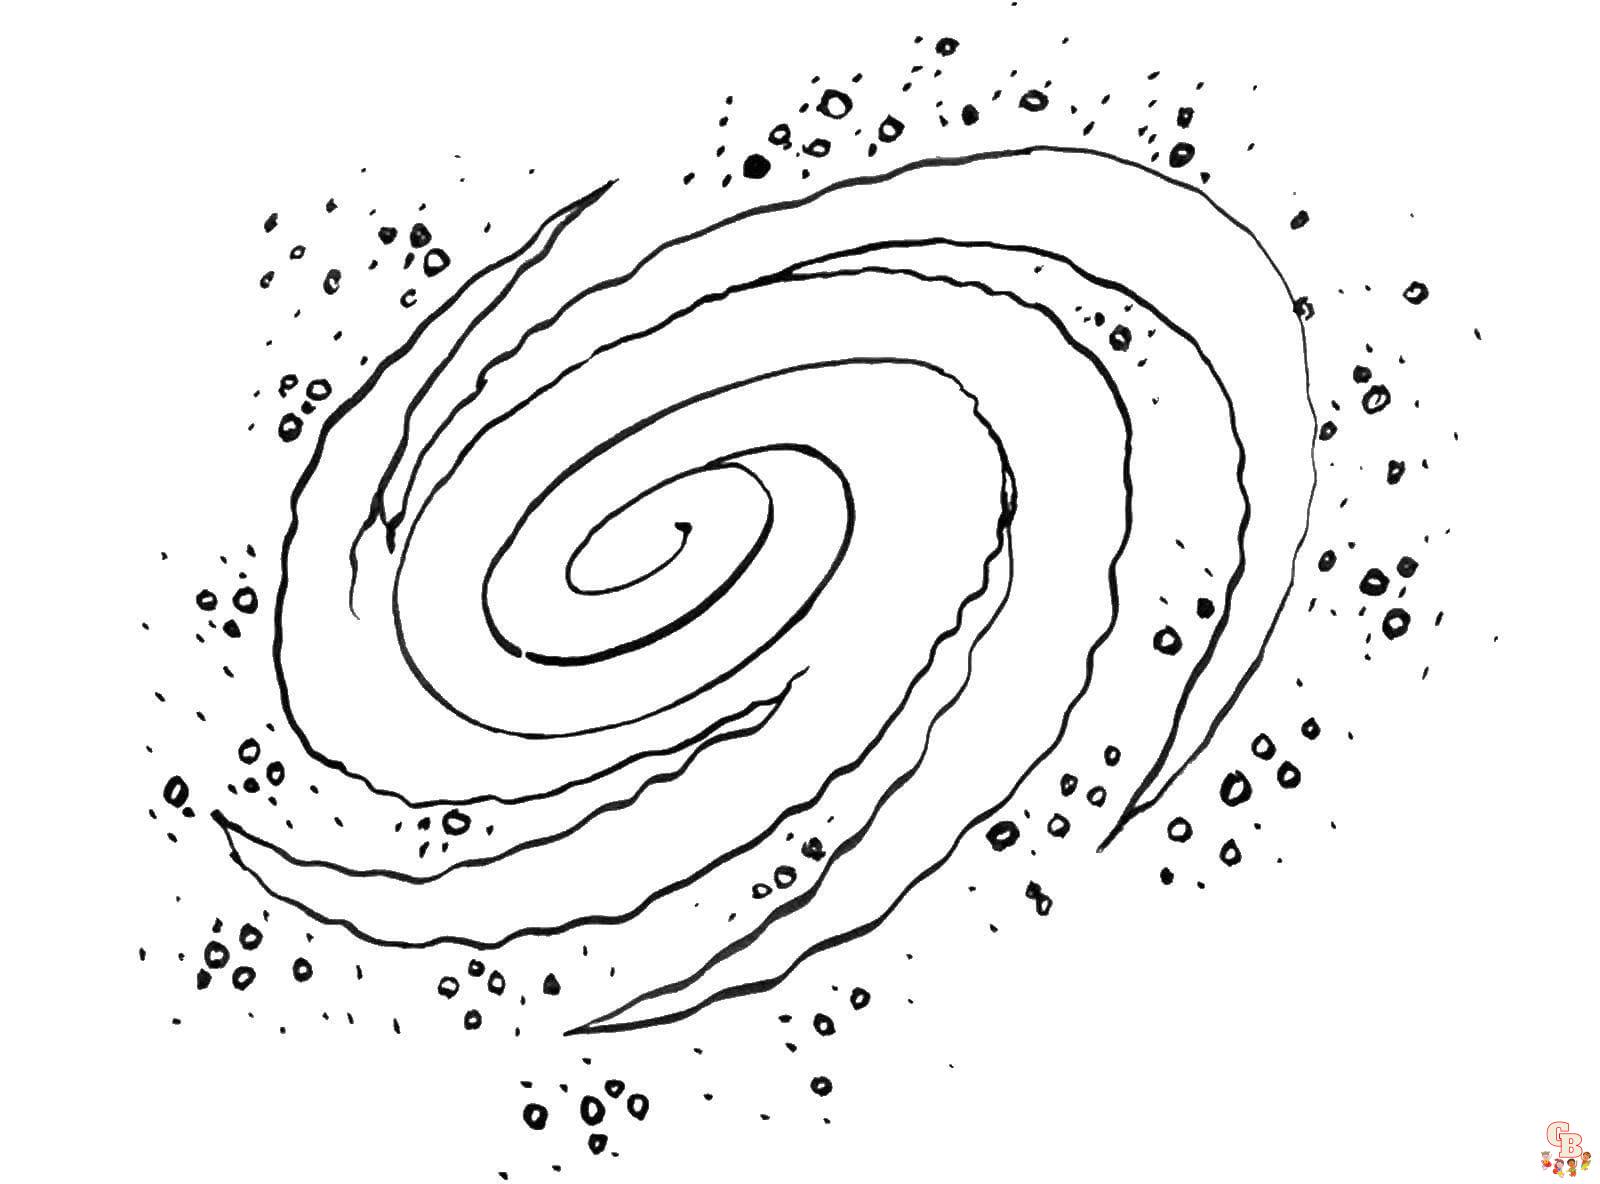 Black hole coloring pages to print